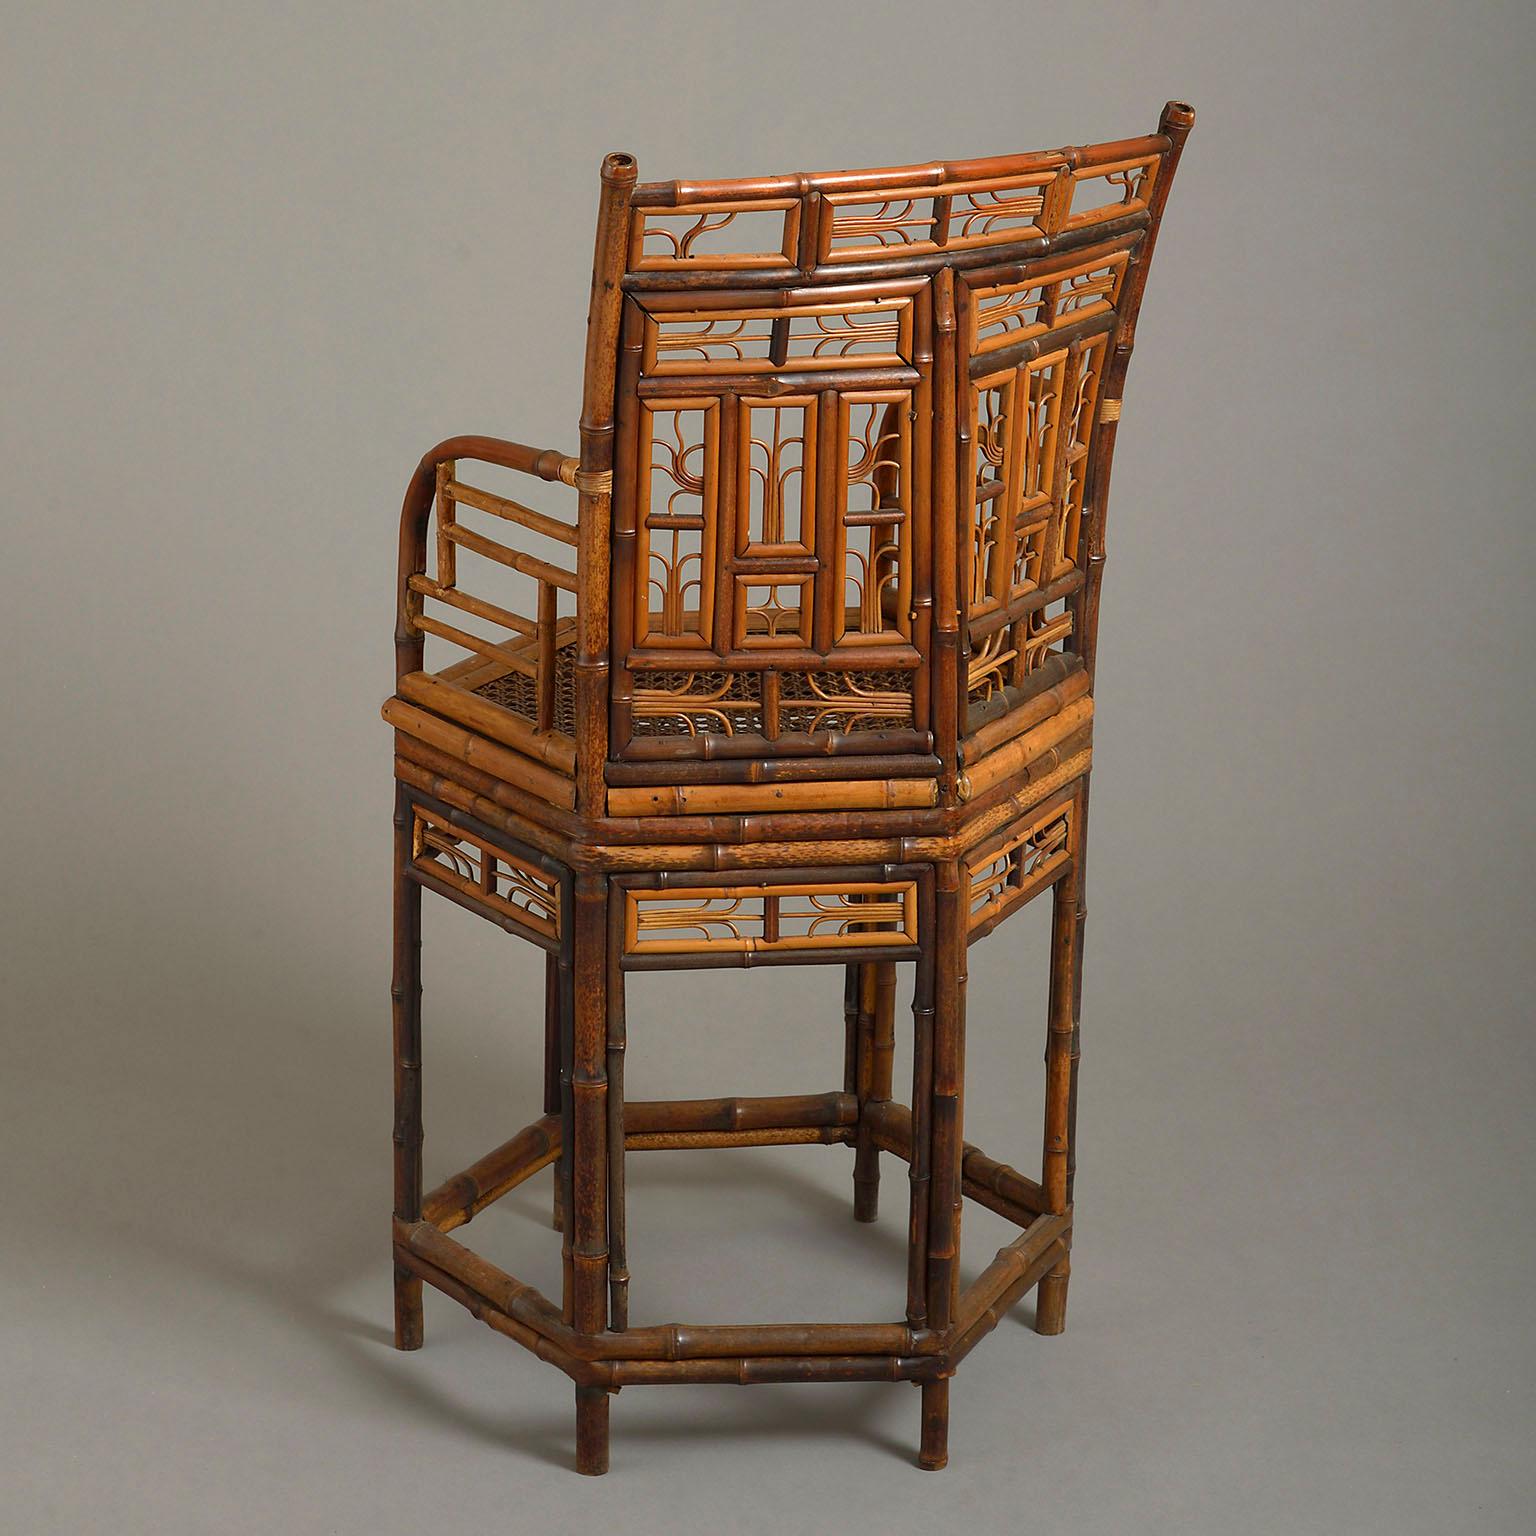 Chinoiserie Early 19th Century ‘Brighton Pavilion’ Bamboo Armchair